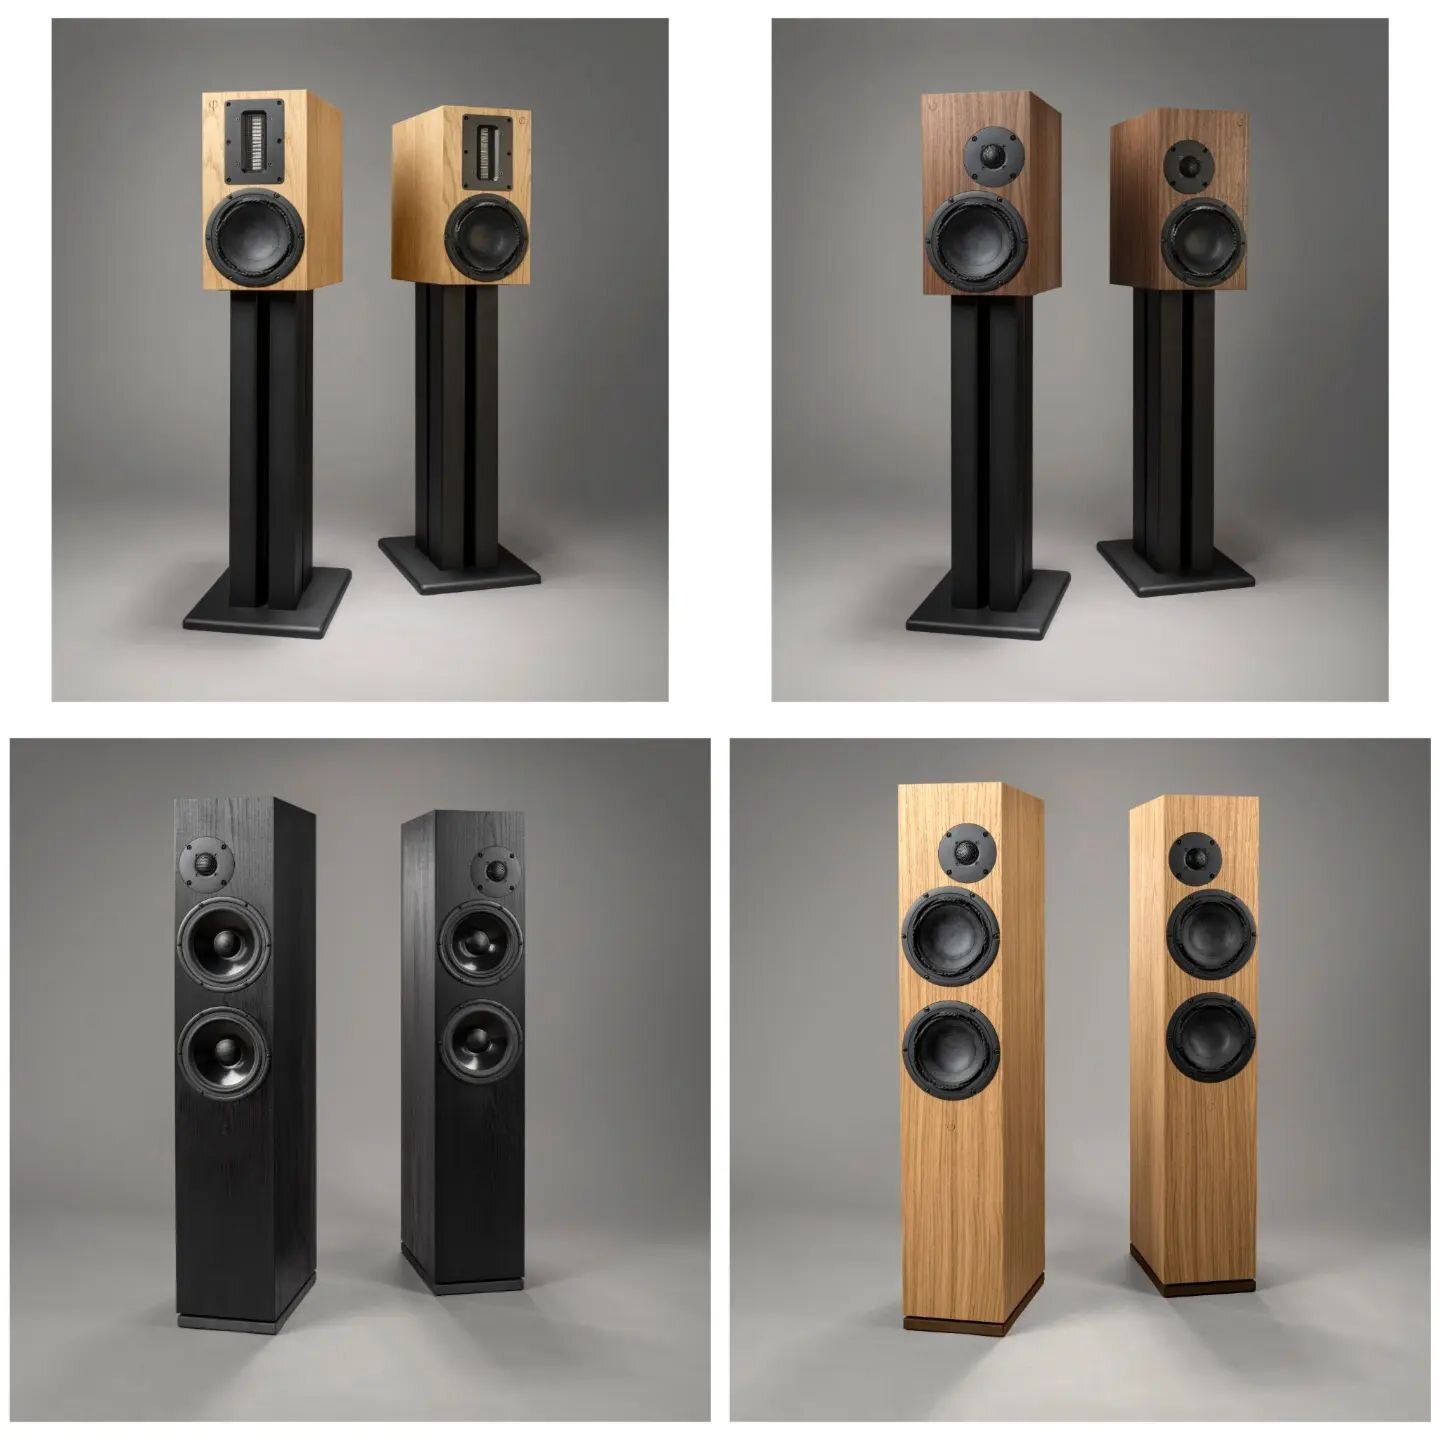 The new, full and complete @oephi_audio loudspeaker line up is now online at VAL HiFi. There is a model for most budgets - from Ascendence to Reference and in between - and every one is a stunner.

www.valhifi.co.uk

#oephi #oephispeakers #oephirefer